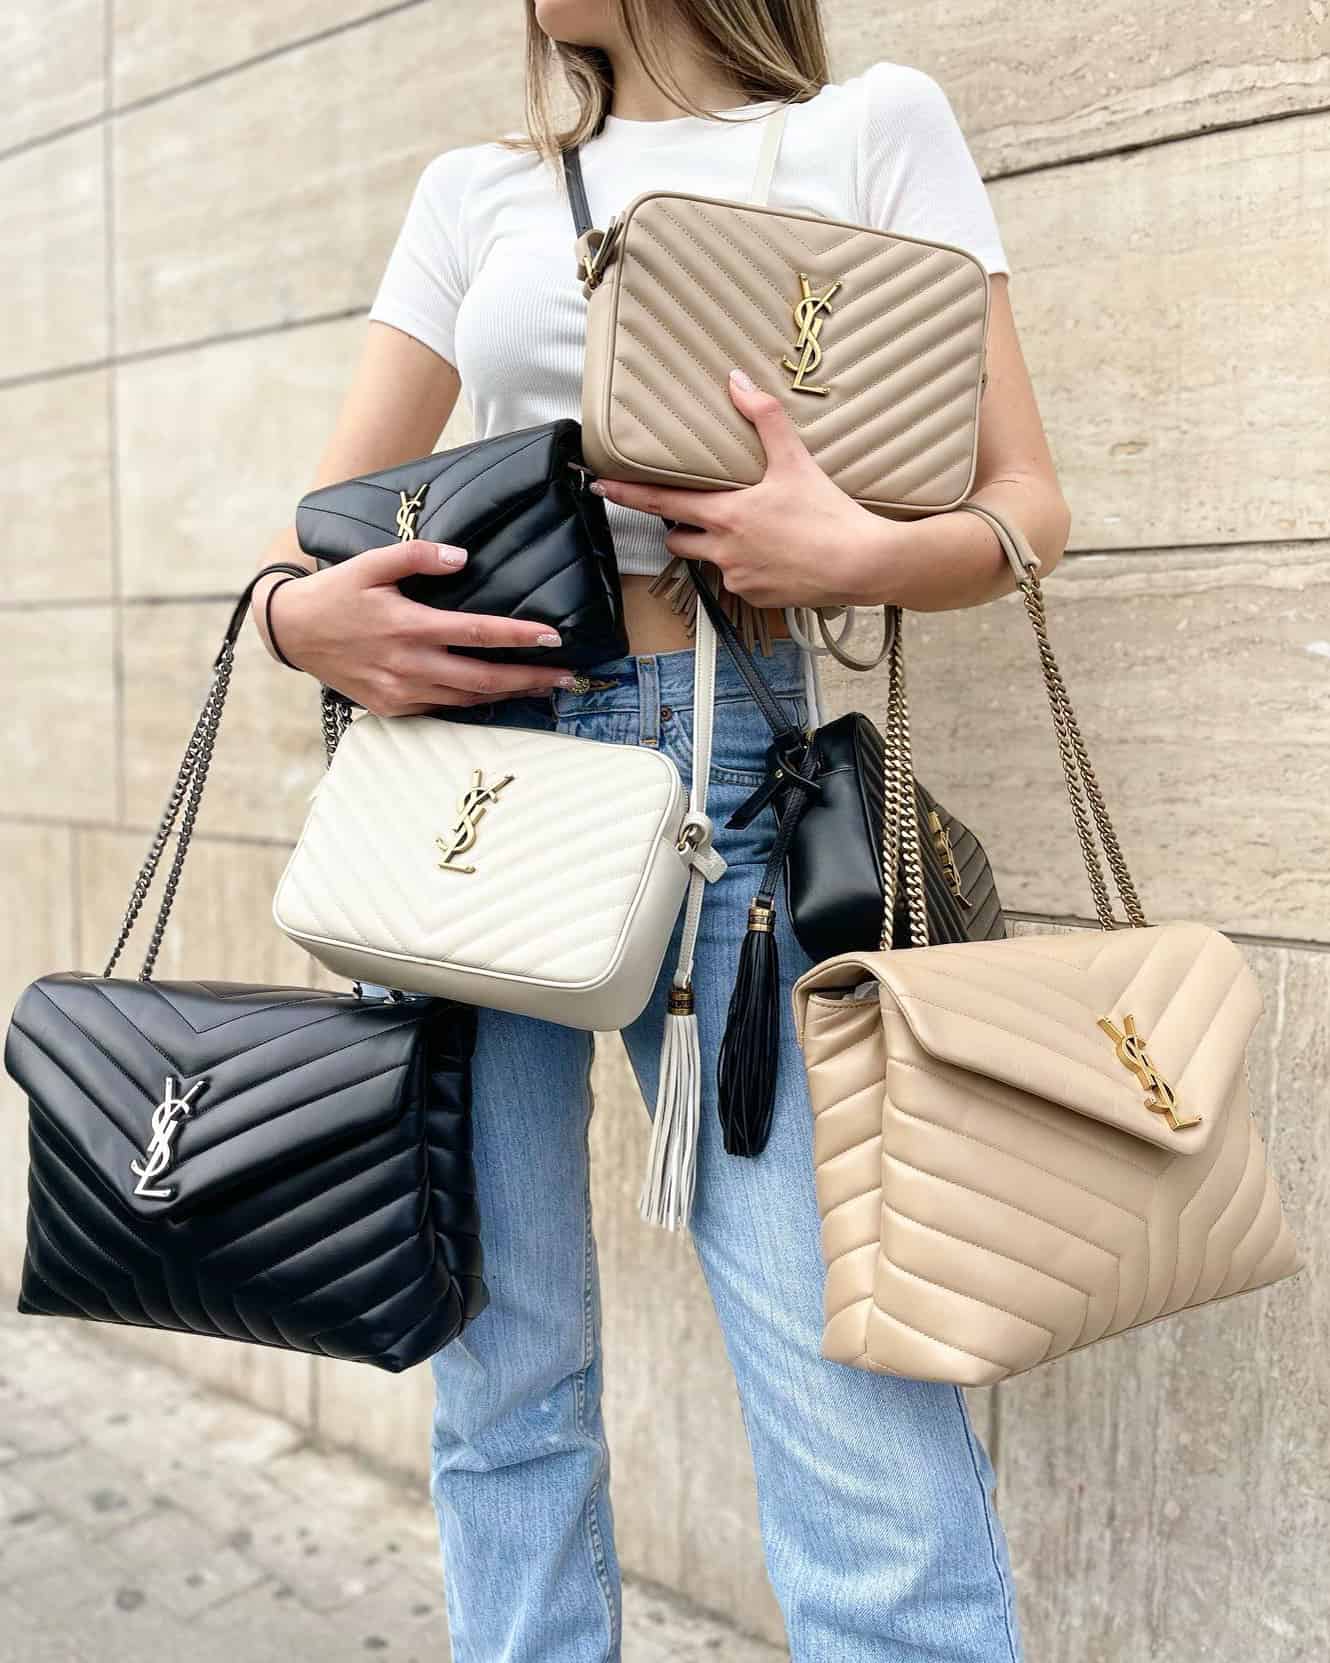 Buy Latest YSL Women Bags Online in India on Sale Price-suu.vn